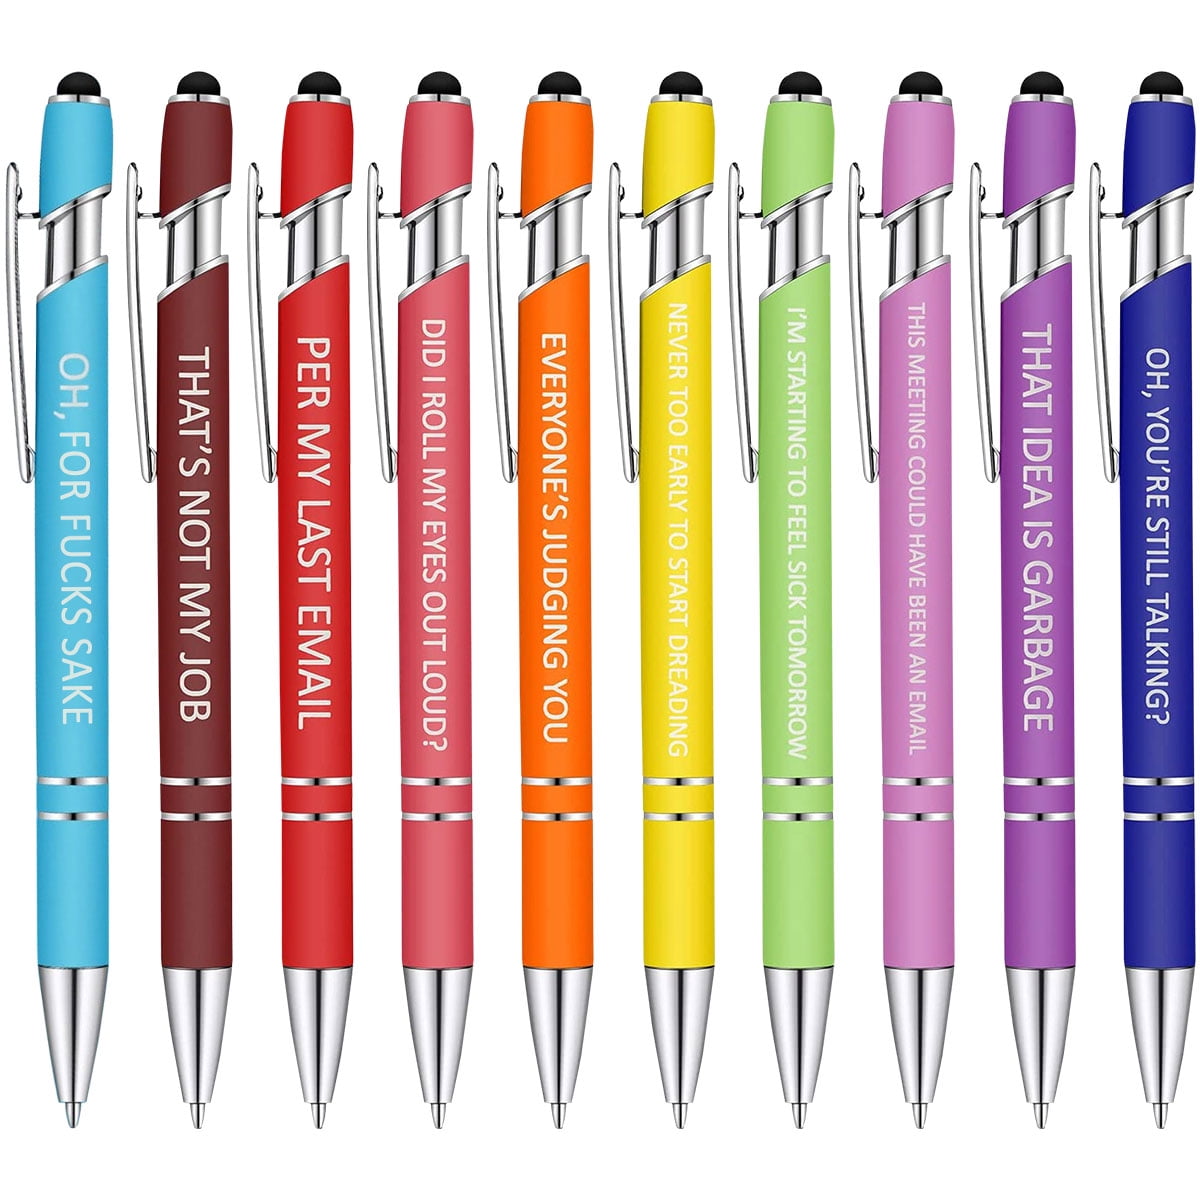 Retrok 10Pcs Ballpoint Pen Set with Funny Quotes  Black Ink - Bright  Color Metal Pen For Office School Teacher Student (Various Quotes) -  